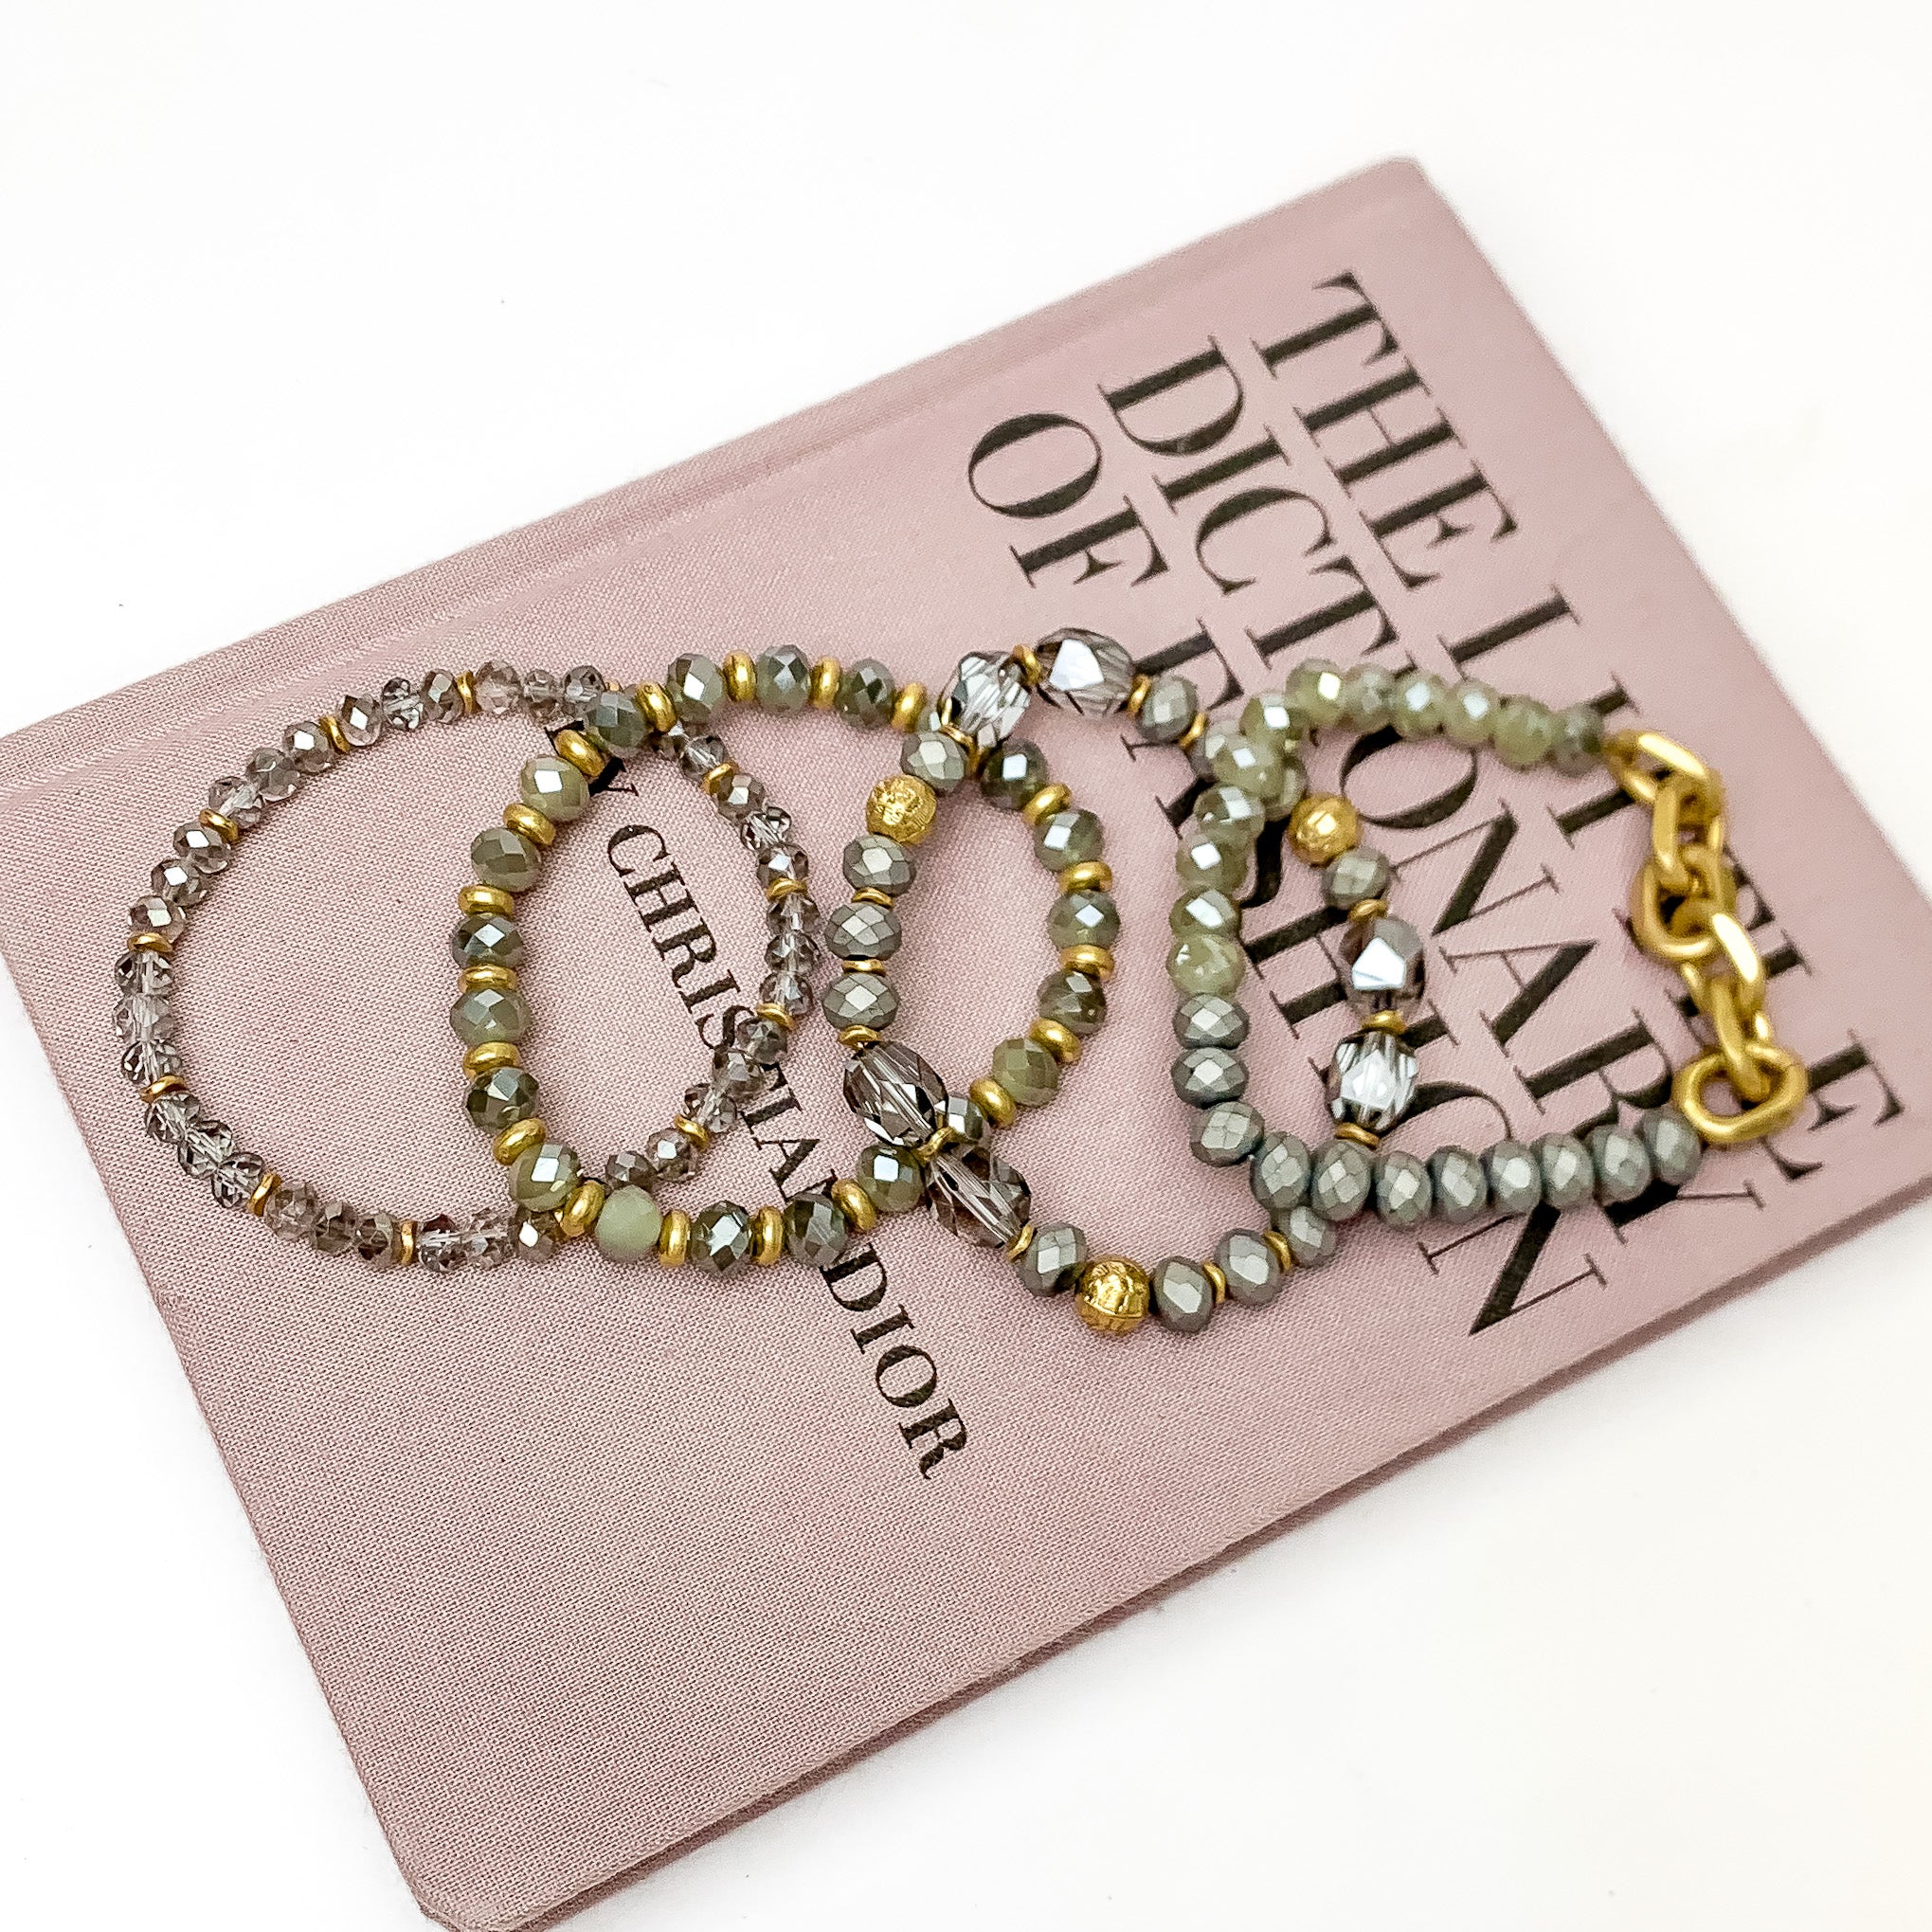 Set of Four | Glorious Gold Crystal Beaded Bracelet Set in Grey. Pictured laying on a closed book. The book is on a white background.